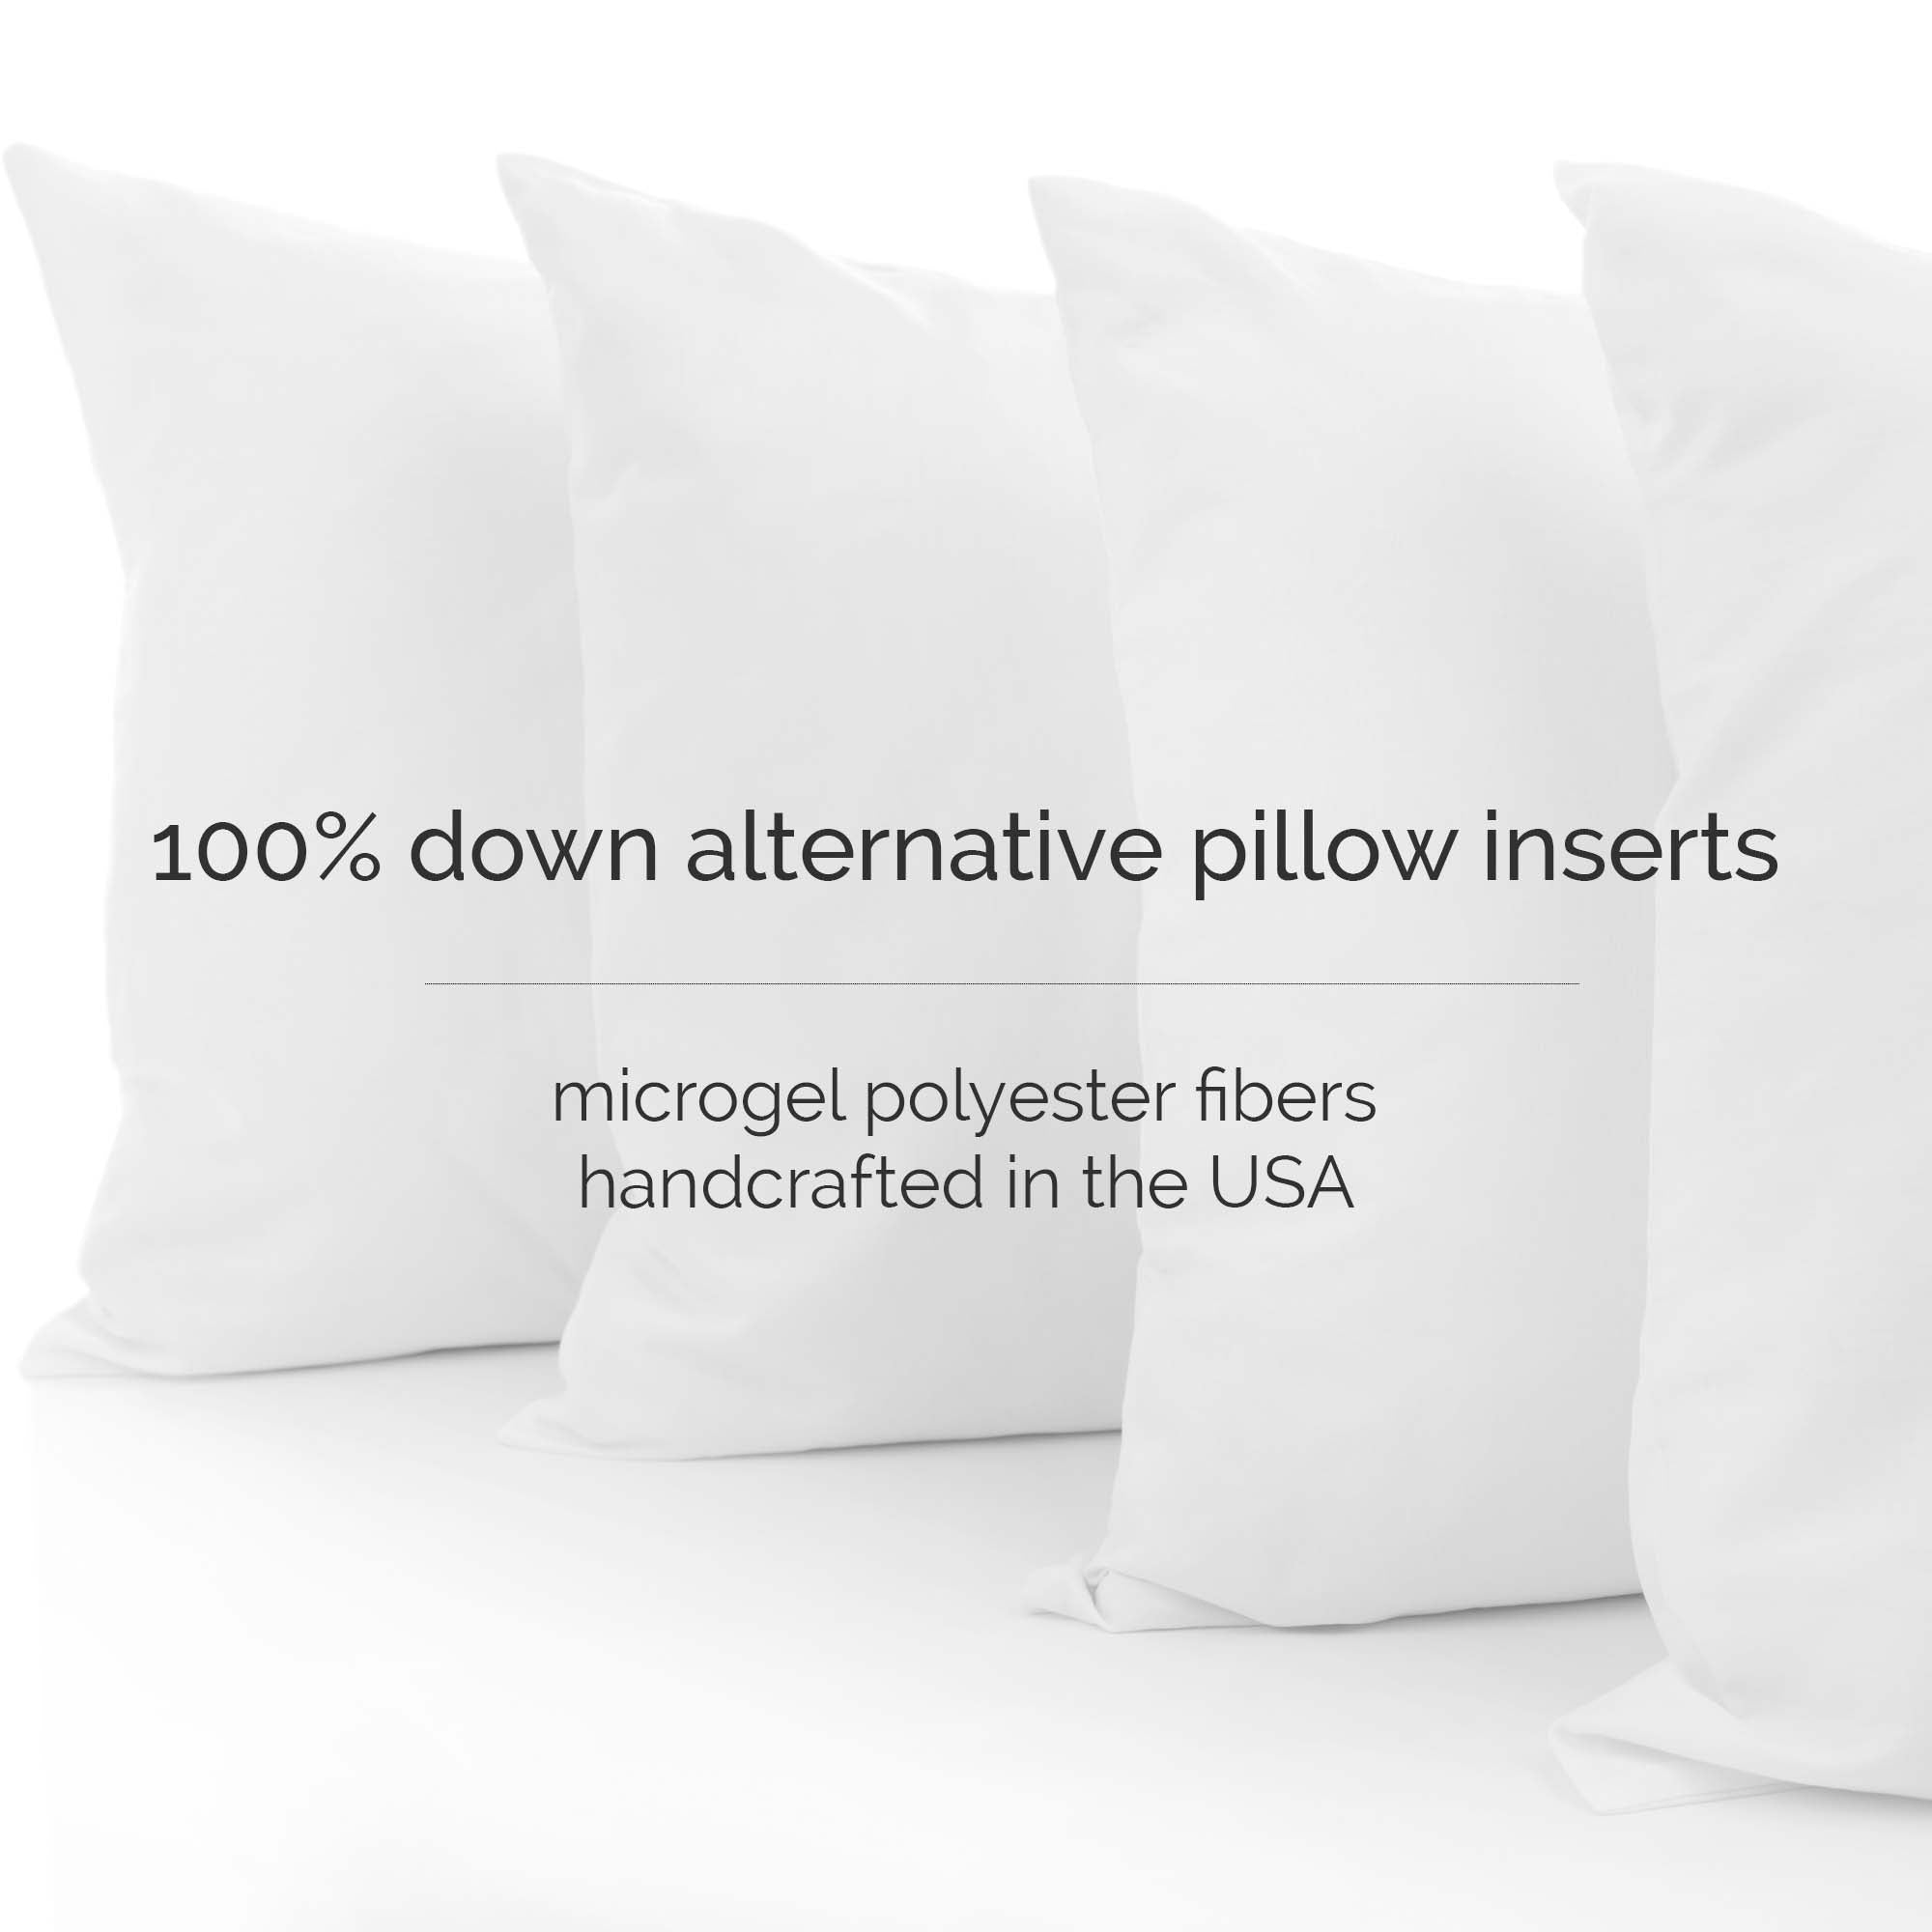 Lux Decor Collection Throw Pillows - 14 x 14 Pillow Insert Set of 4 White  Soft & Comfortable Square Pillows